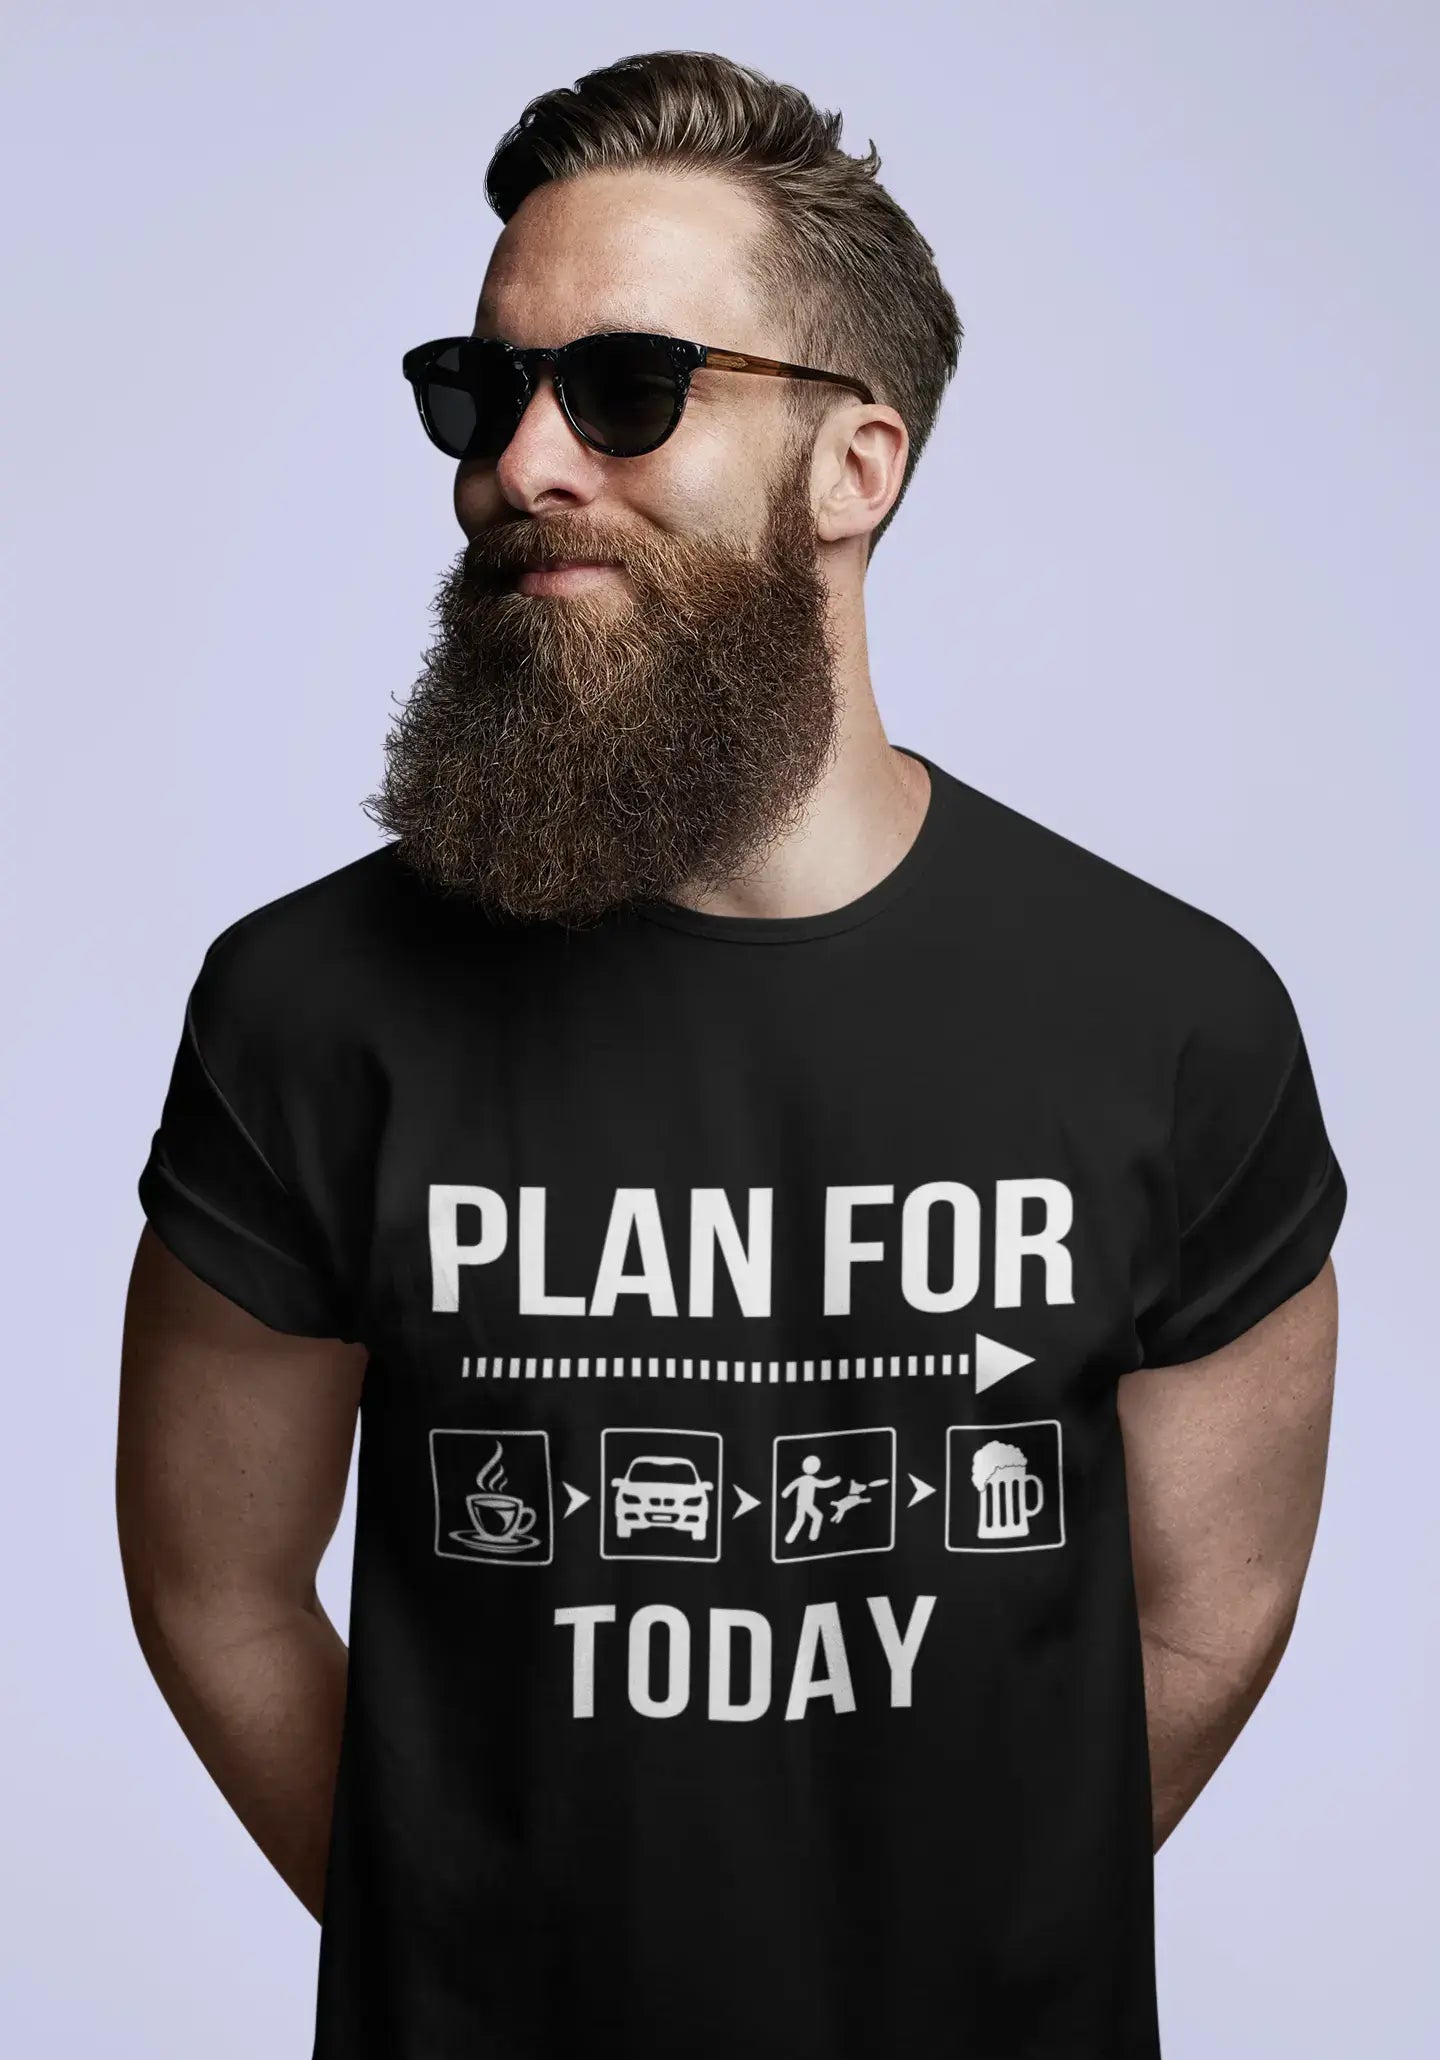 ULTRABASIC Men's T-Shirt Plan For Today - Funny Dog Coffee Beer Lover Tee Shirt